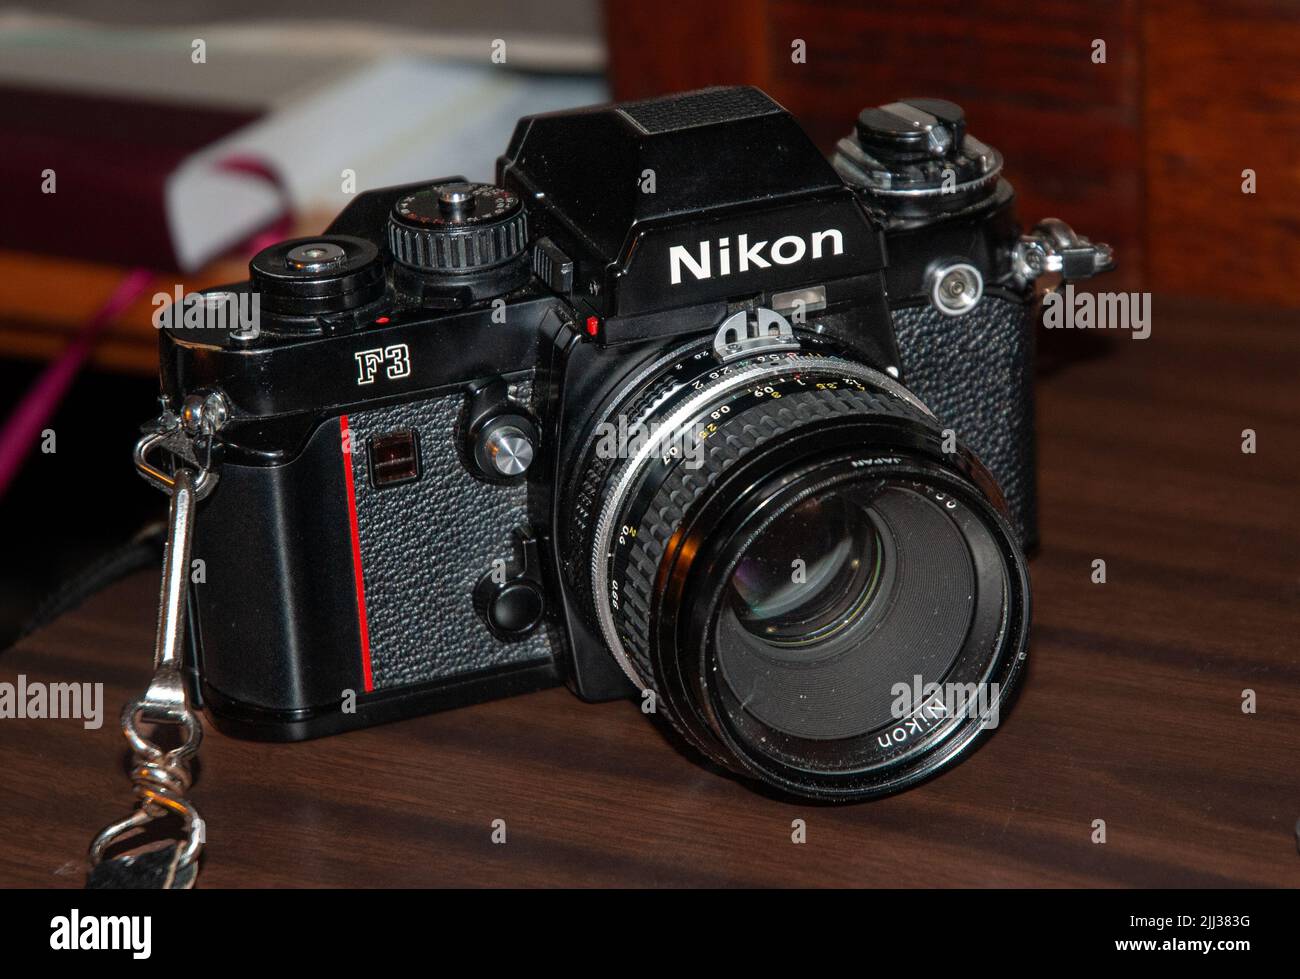 A vintage 1980s Nikon F3 of the model styled by Italian designer Giorgetto Giugiaro, produced from 1980 to 2001, longest running professional Nikon. Stock Photo